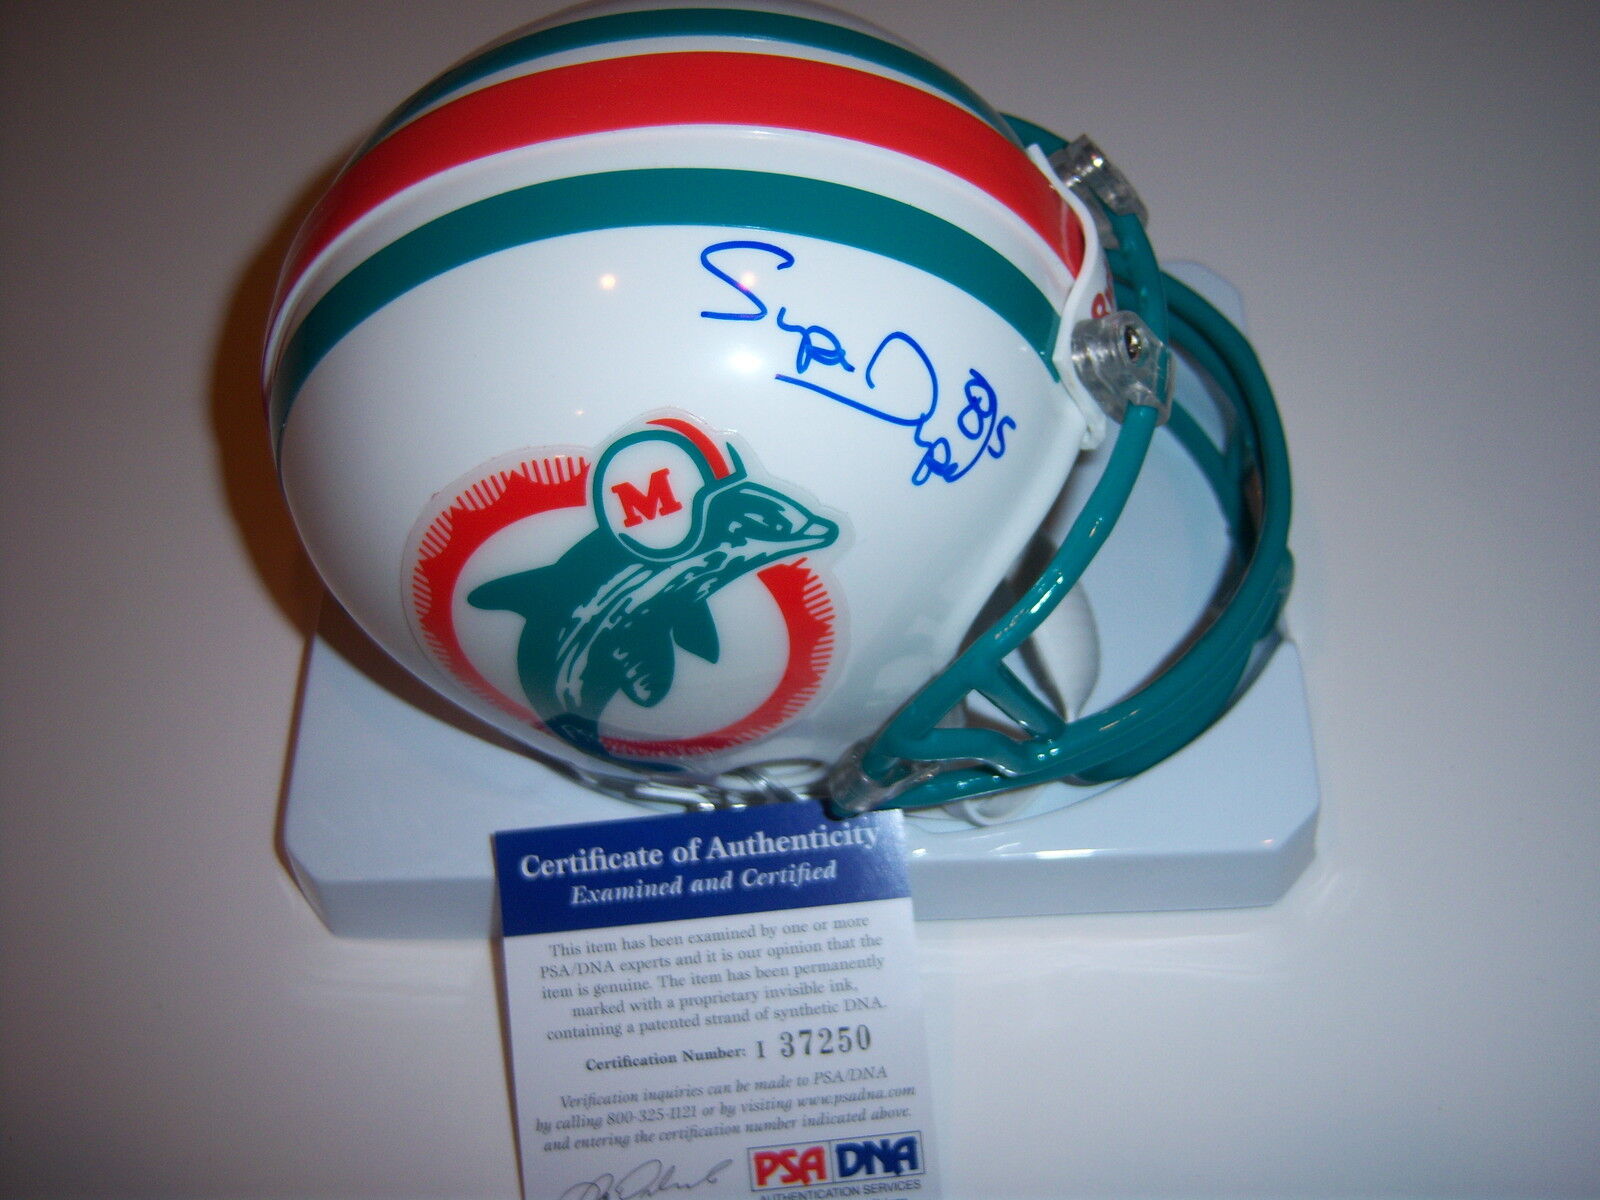 sold out MARK DUPER MIAMI DOLPHINS PSA DNA MINI HELMET Omaha Mall SIGNED